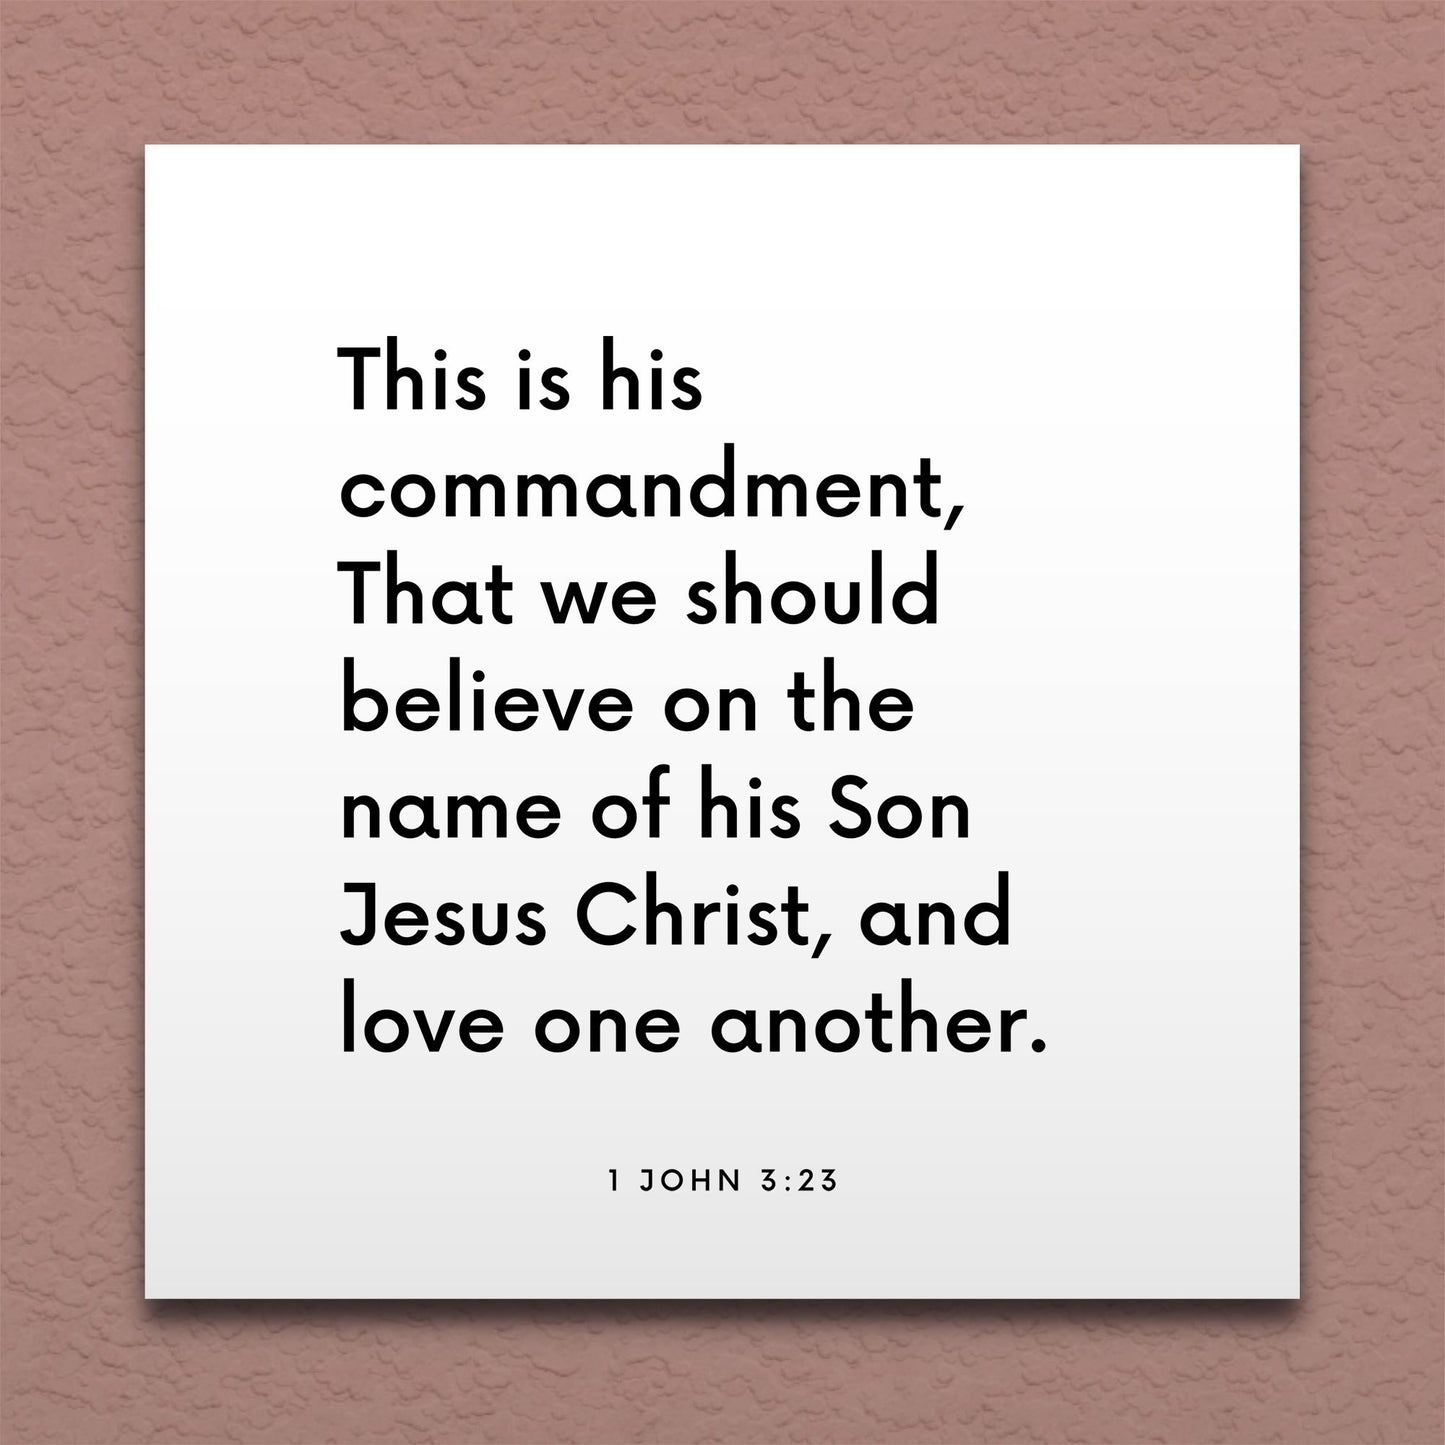 Wall-mounted scripture tile for 1 John 3:23 - "We should believe on the name of his Son"